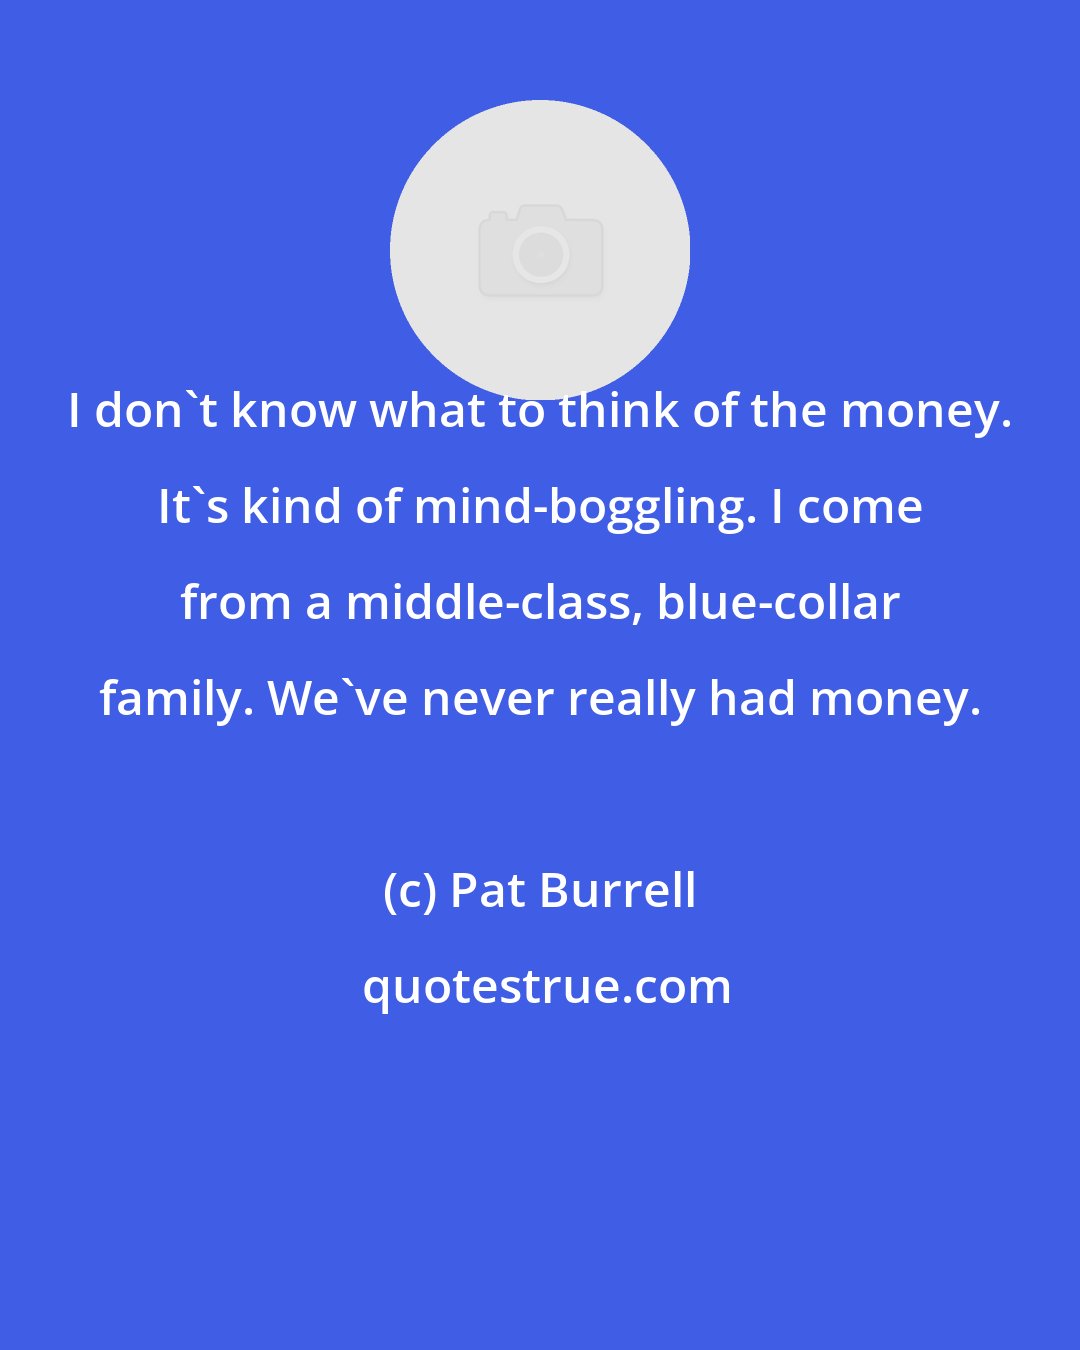 Pat Burrell: I don't know what to think of the money. It's kind of mind-boggling. I come from a middle-class, blue-collar family. We've never really had money.